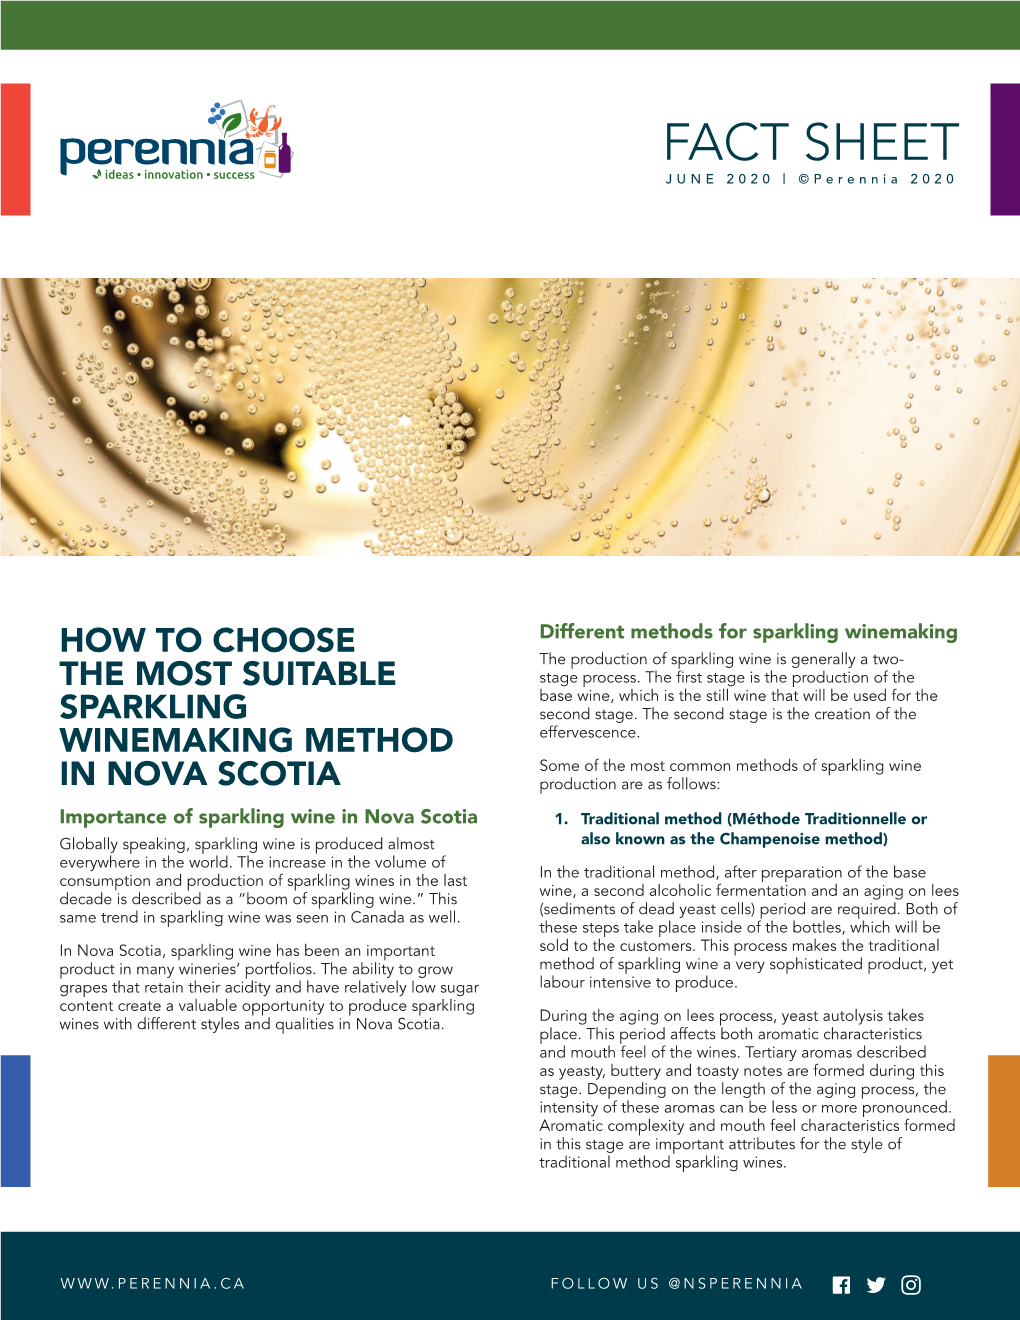 How to Choose the Most Suitable Sparkling Winemaking